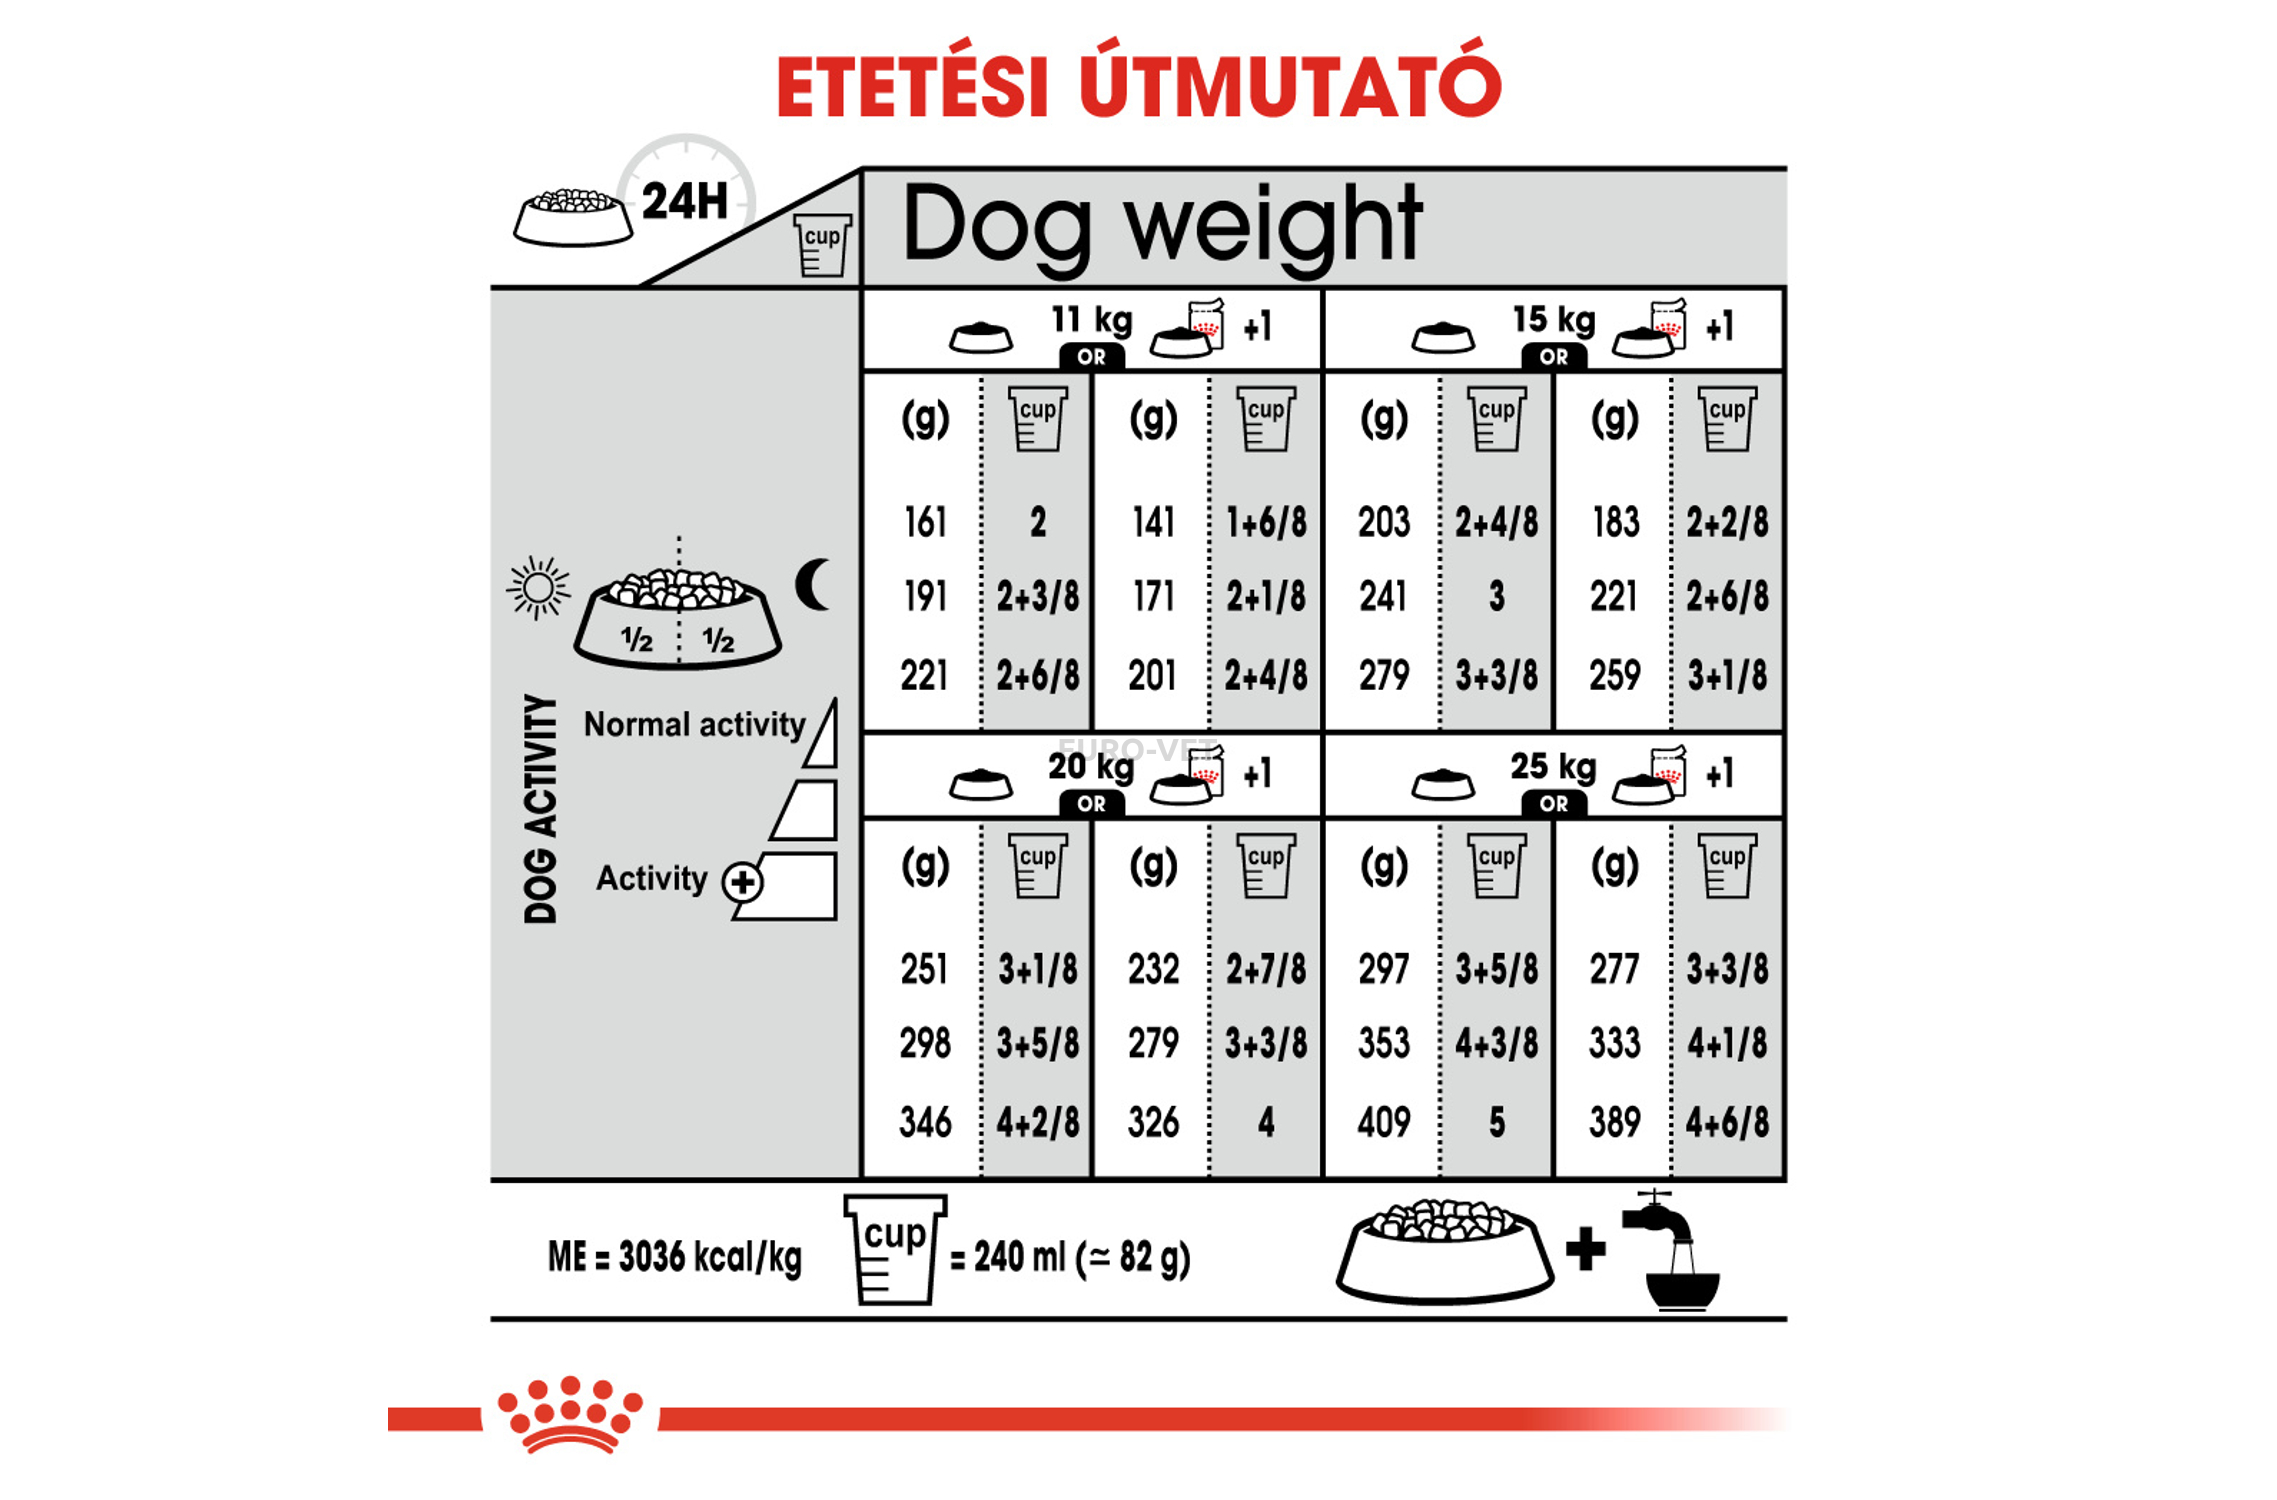 royal canin light weight care 13kg